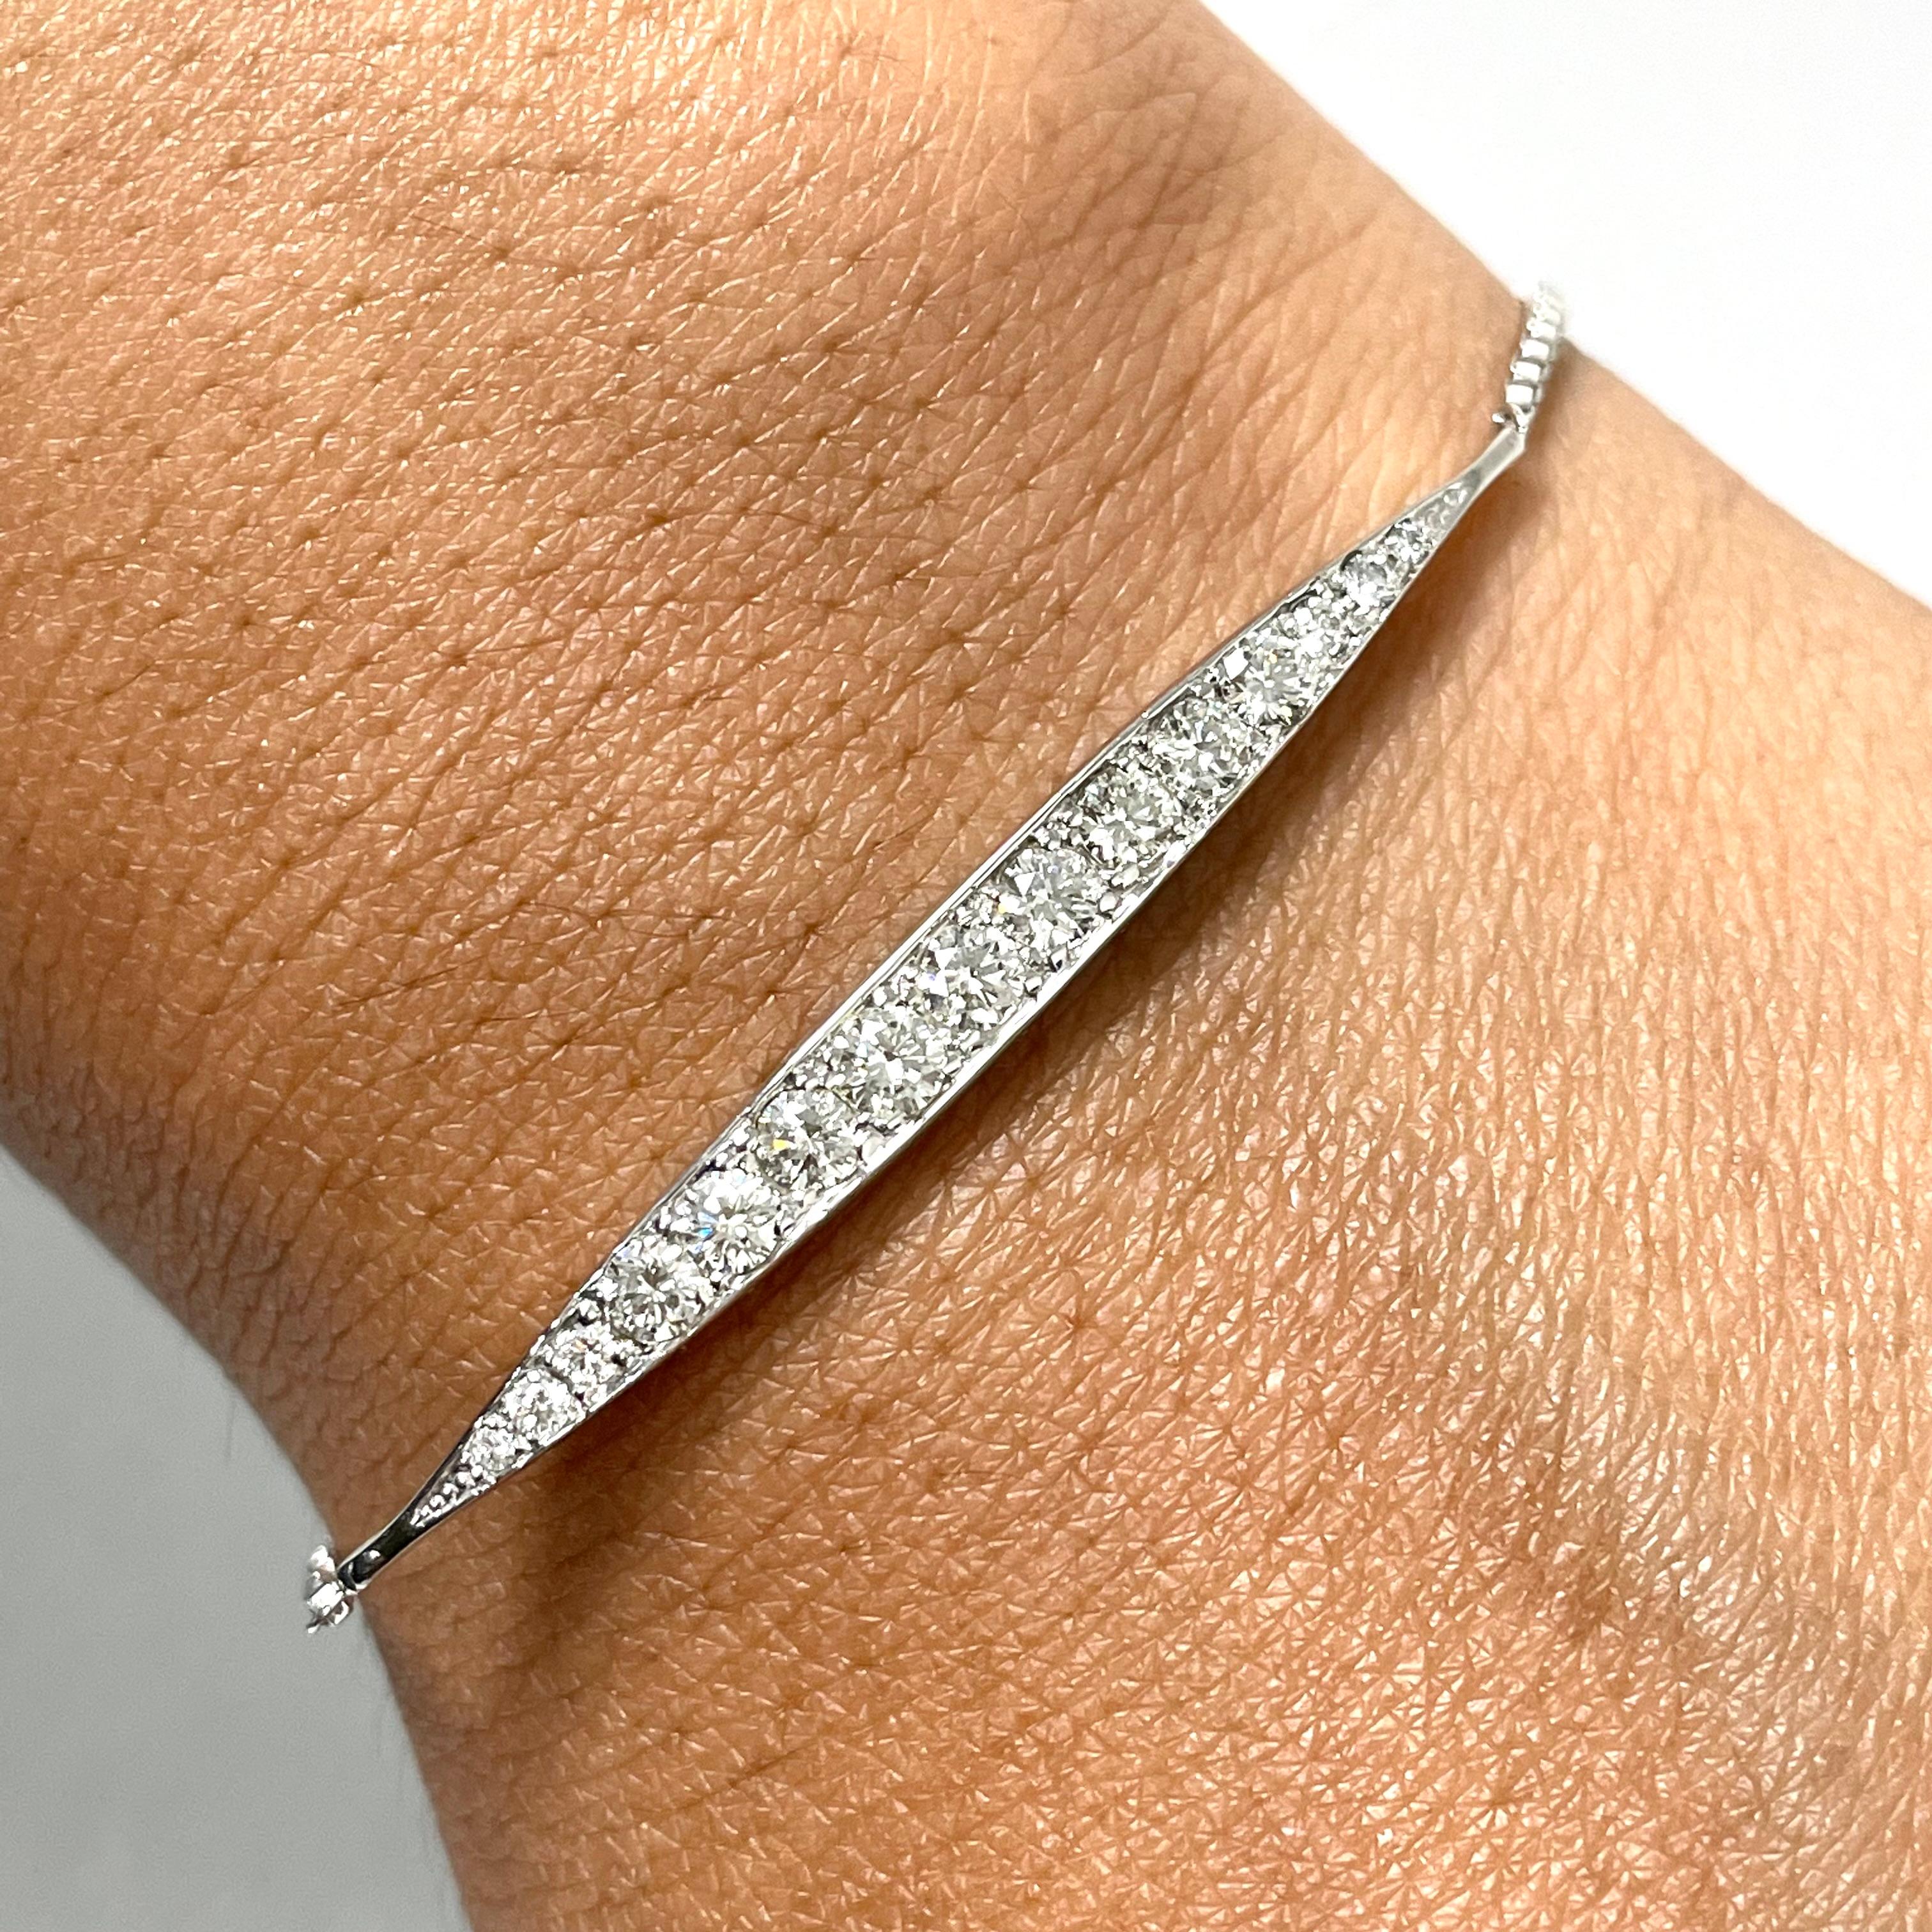 Always a fun accessory, the Bolo bar bracelet adds sparkles and shine to every look.

Diamonds Shape: Round
Total Diamond Weight: 0.96 ct 
No. of Diamonds: 15
Diamond Color: G - H 
Diamond Clarity: VVS - VS (Very Very Slightly Included - Very